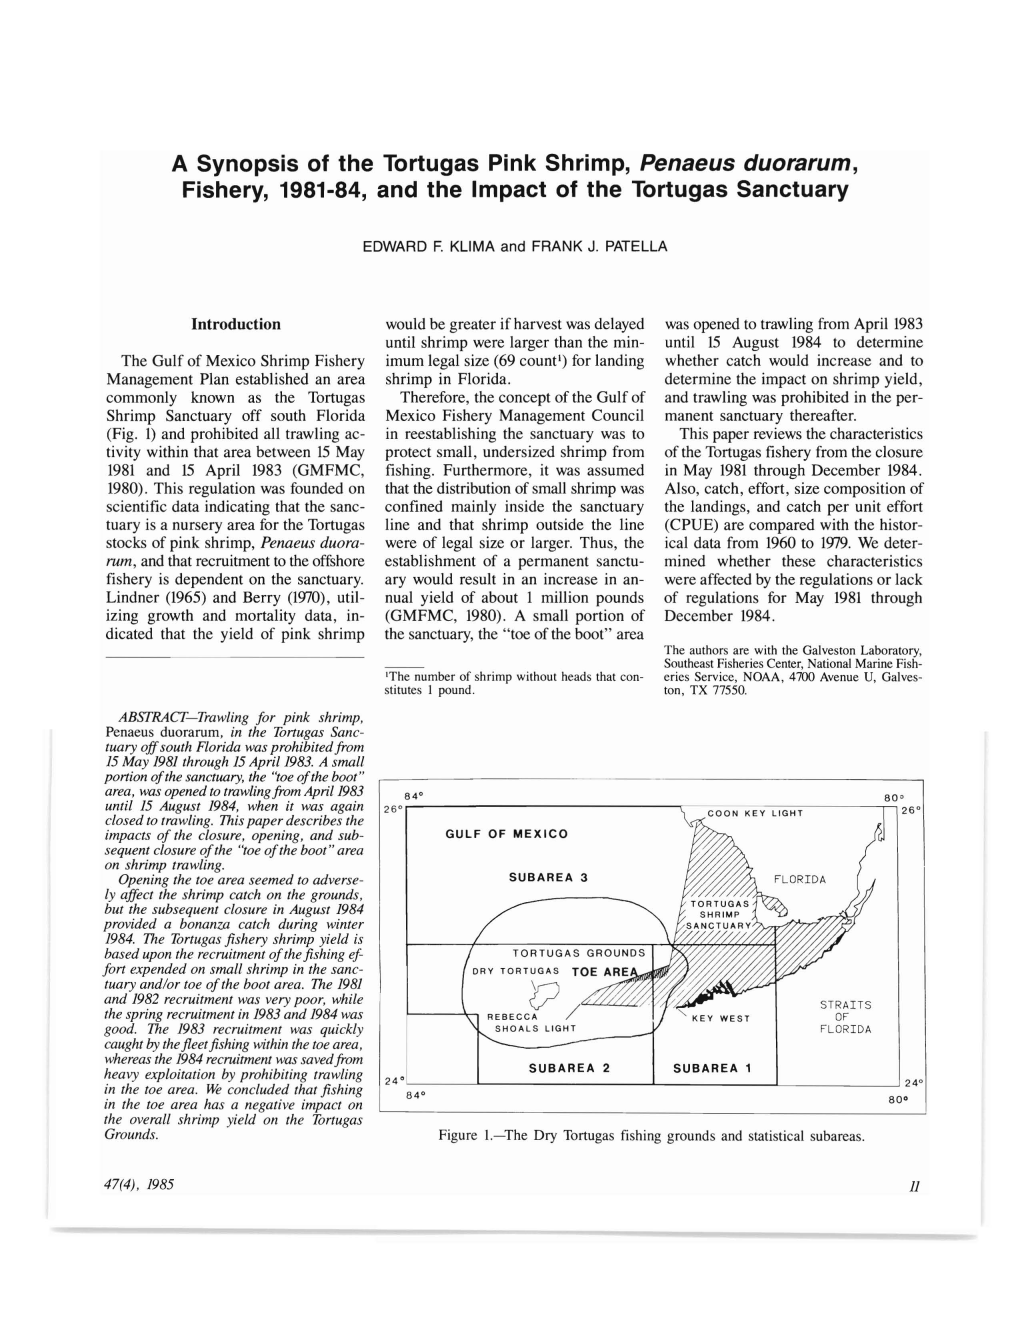 A Synopsis of the Tortugas Pink Shrimp, Penaeus Duorarum, Fishery, 1981-84, and the Impact of the Tortugas Sanctuary